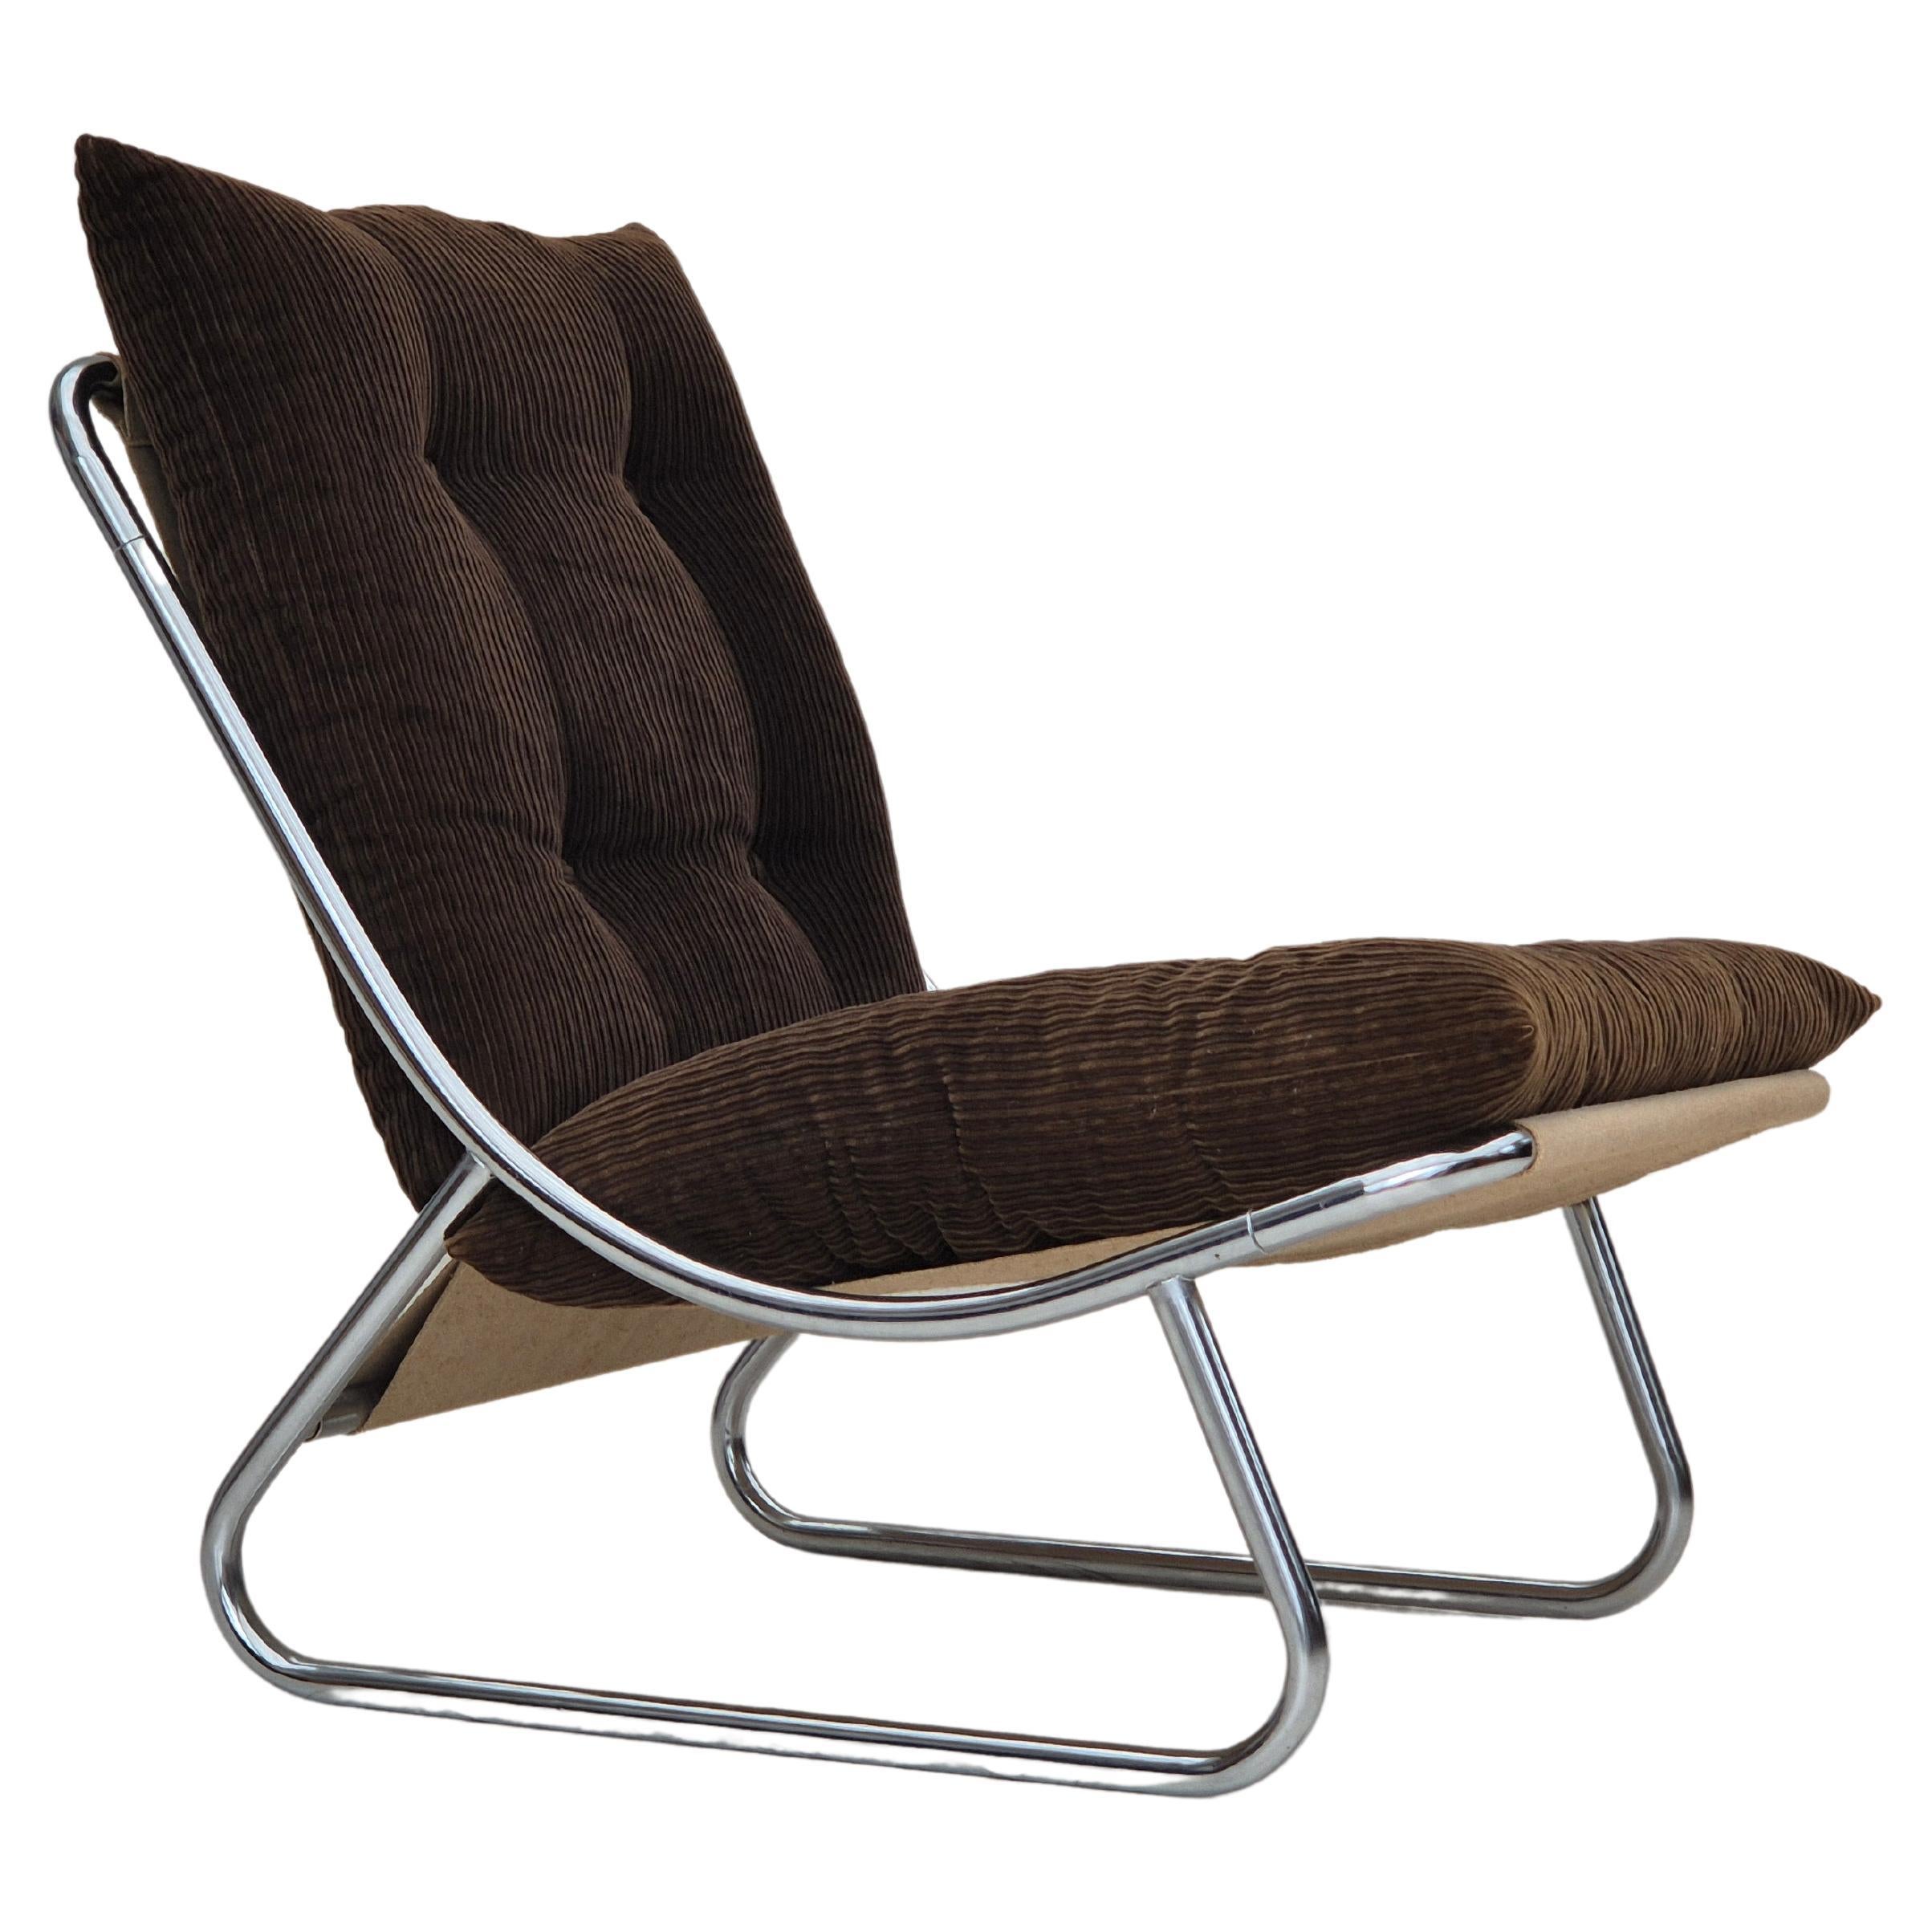 1970s, British design by Peter Hoyte, "Sling" lounge chair, corduroy, original. For Sale